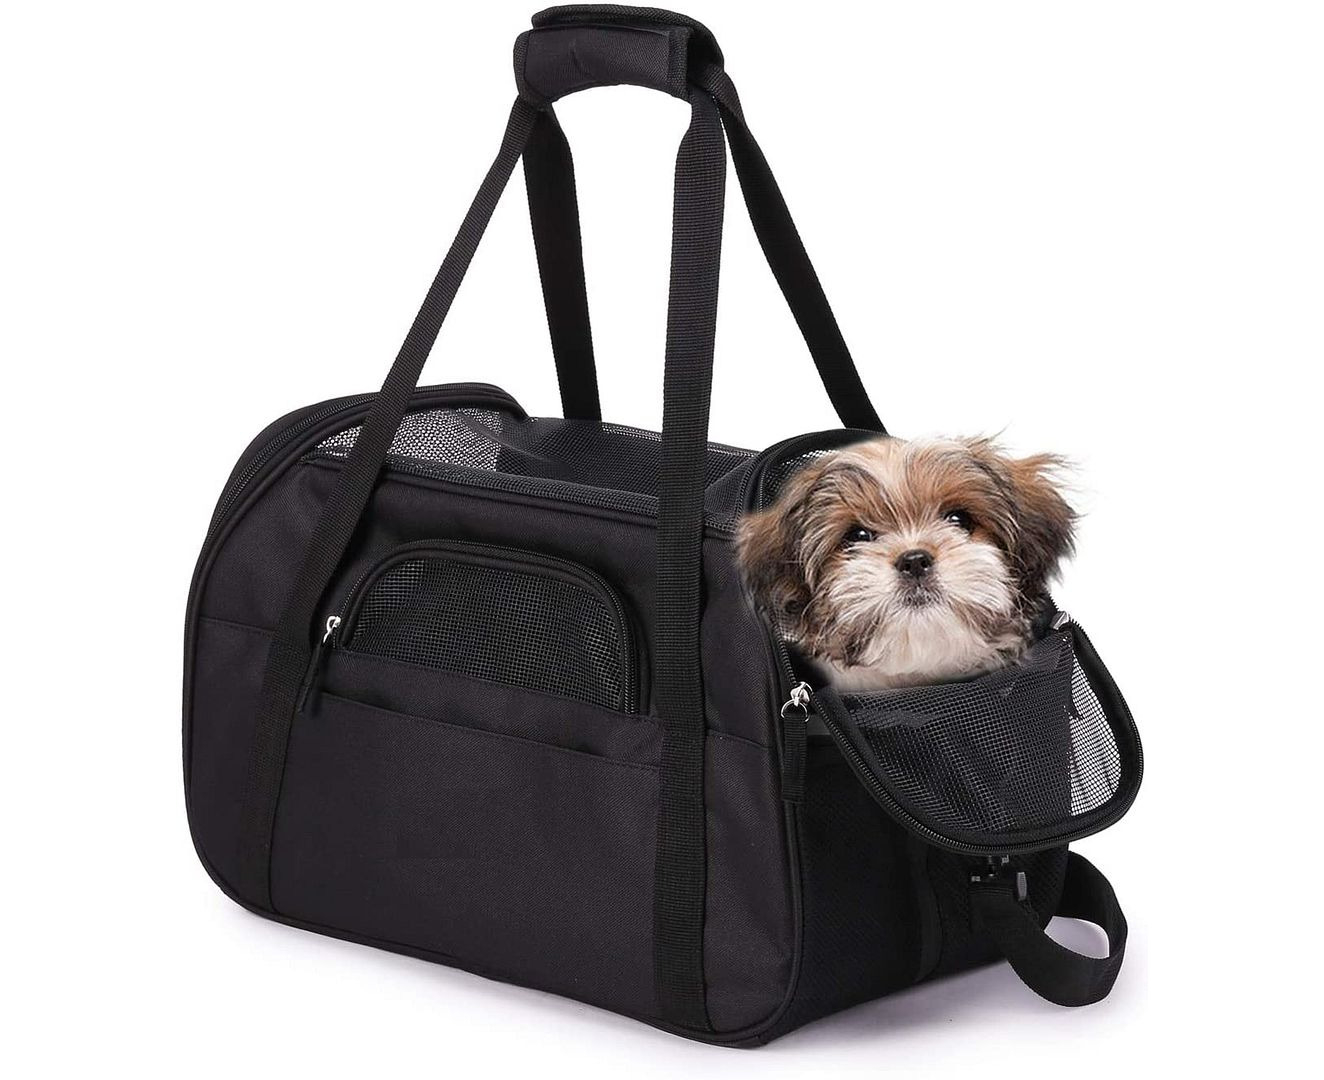 Foldable Washable and Travel Friendly Pet Carrier Lightweight PET&CUDDLE Soft Sided Airline Pet Carrier for Small Dogs and Small Cats 